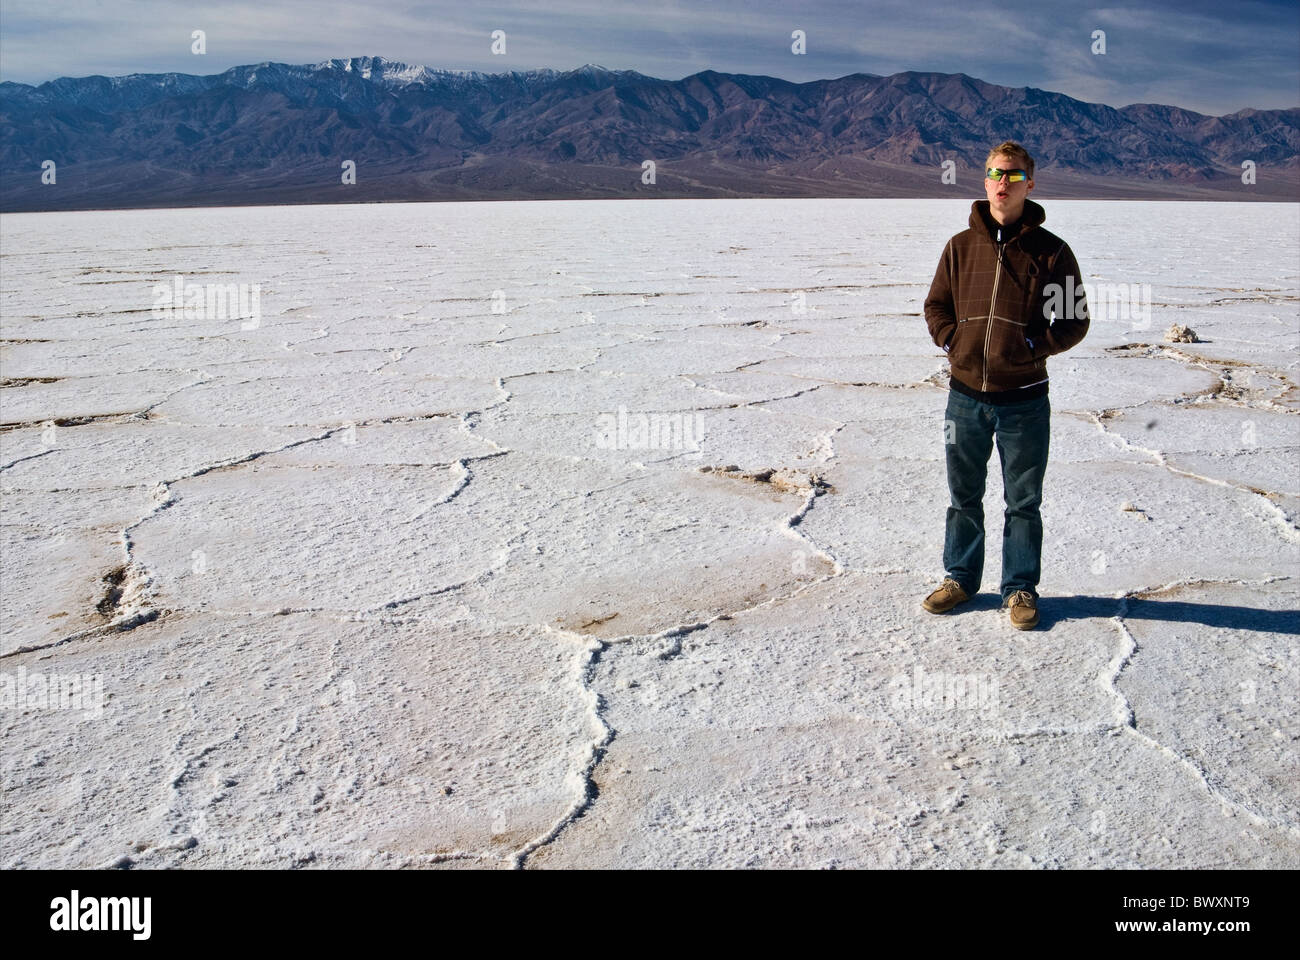 Teenager hiker at Salt Flats in Badwater area, winter, Death Valley, California, USA Stock Photo